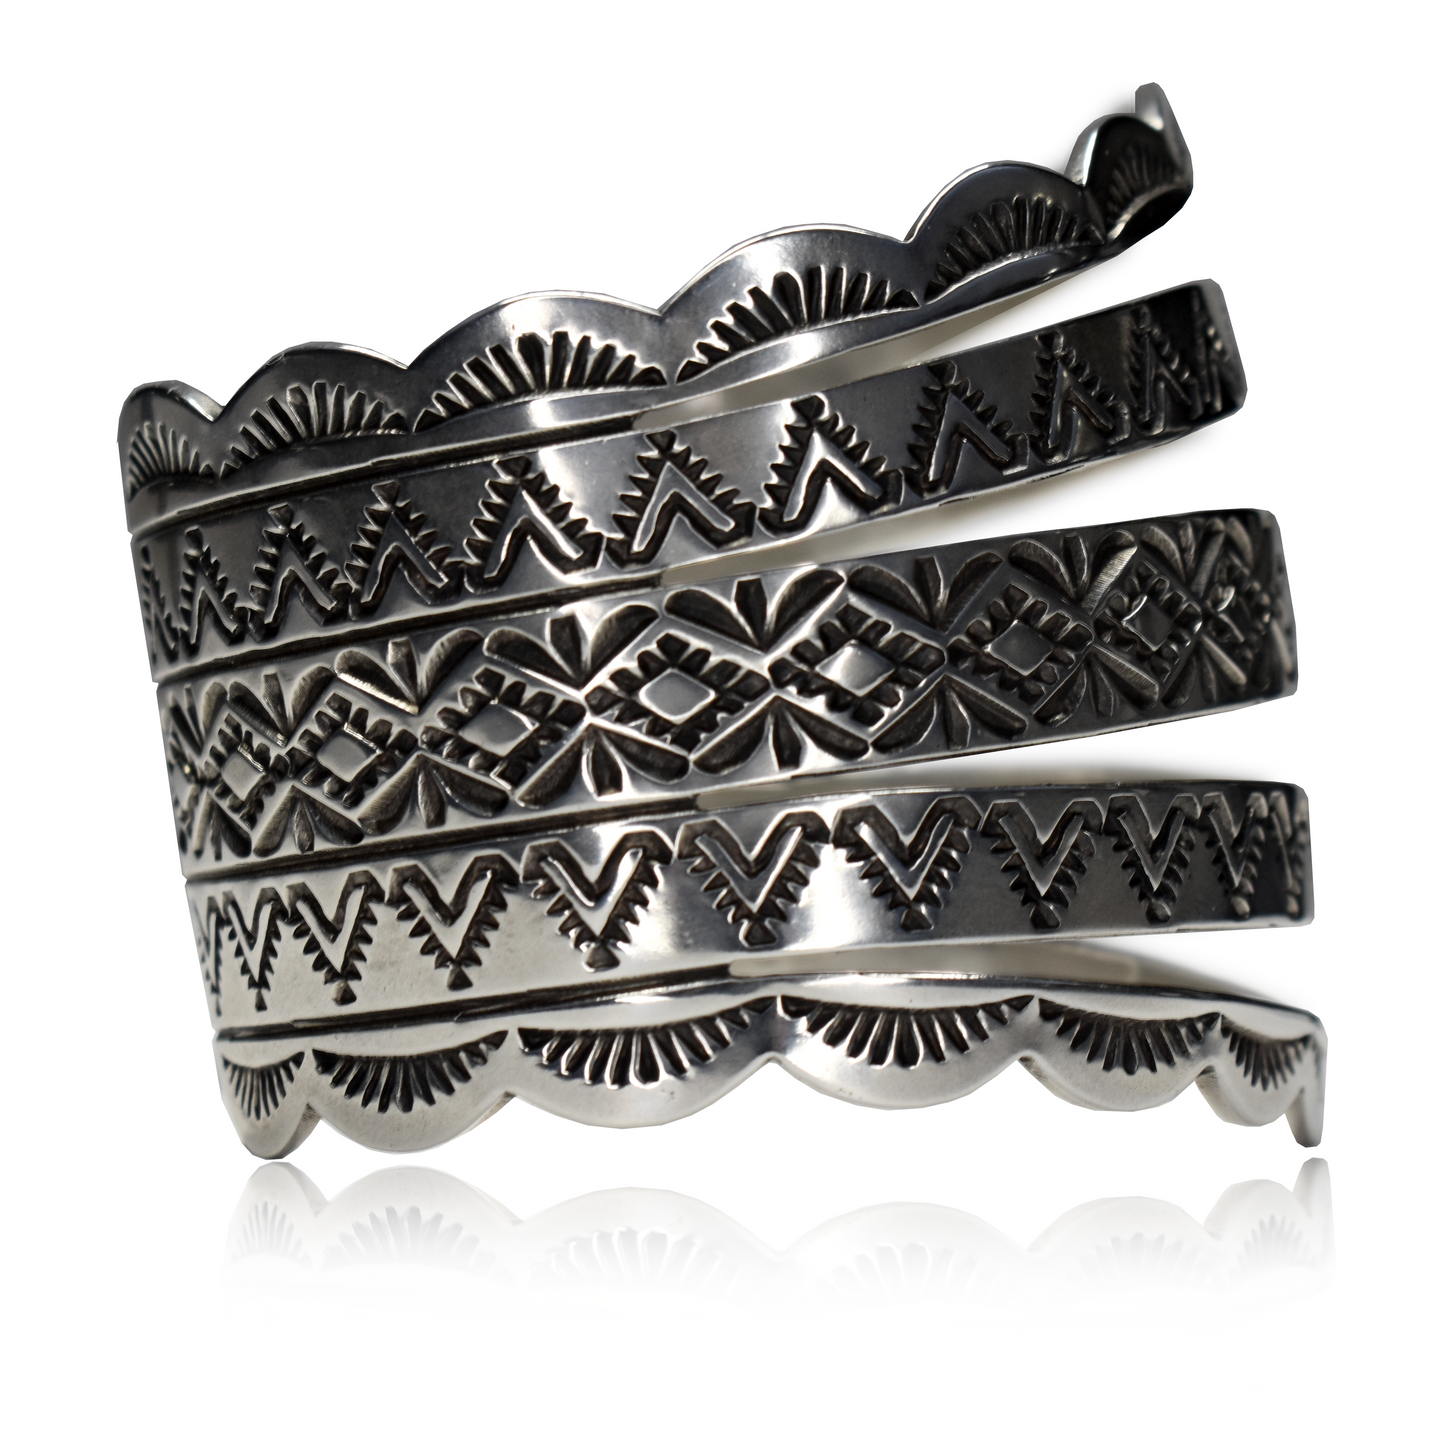 Sterling Silver Cuff by Everett and Mary Teller